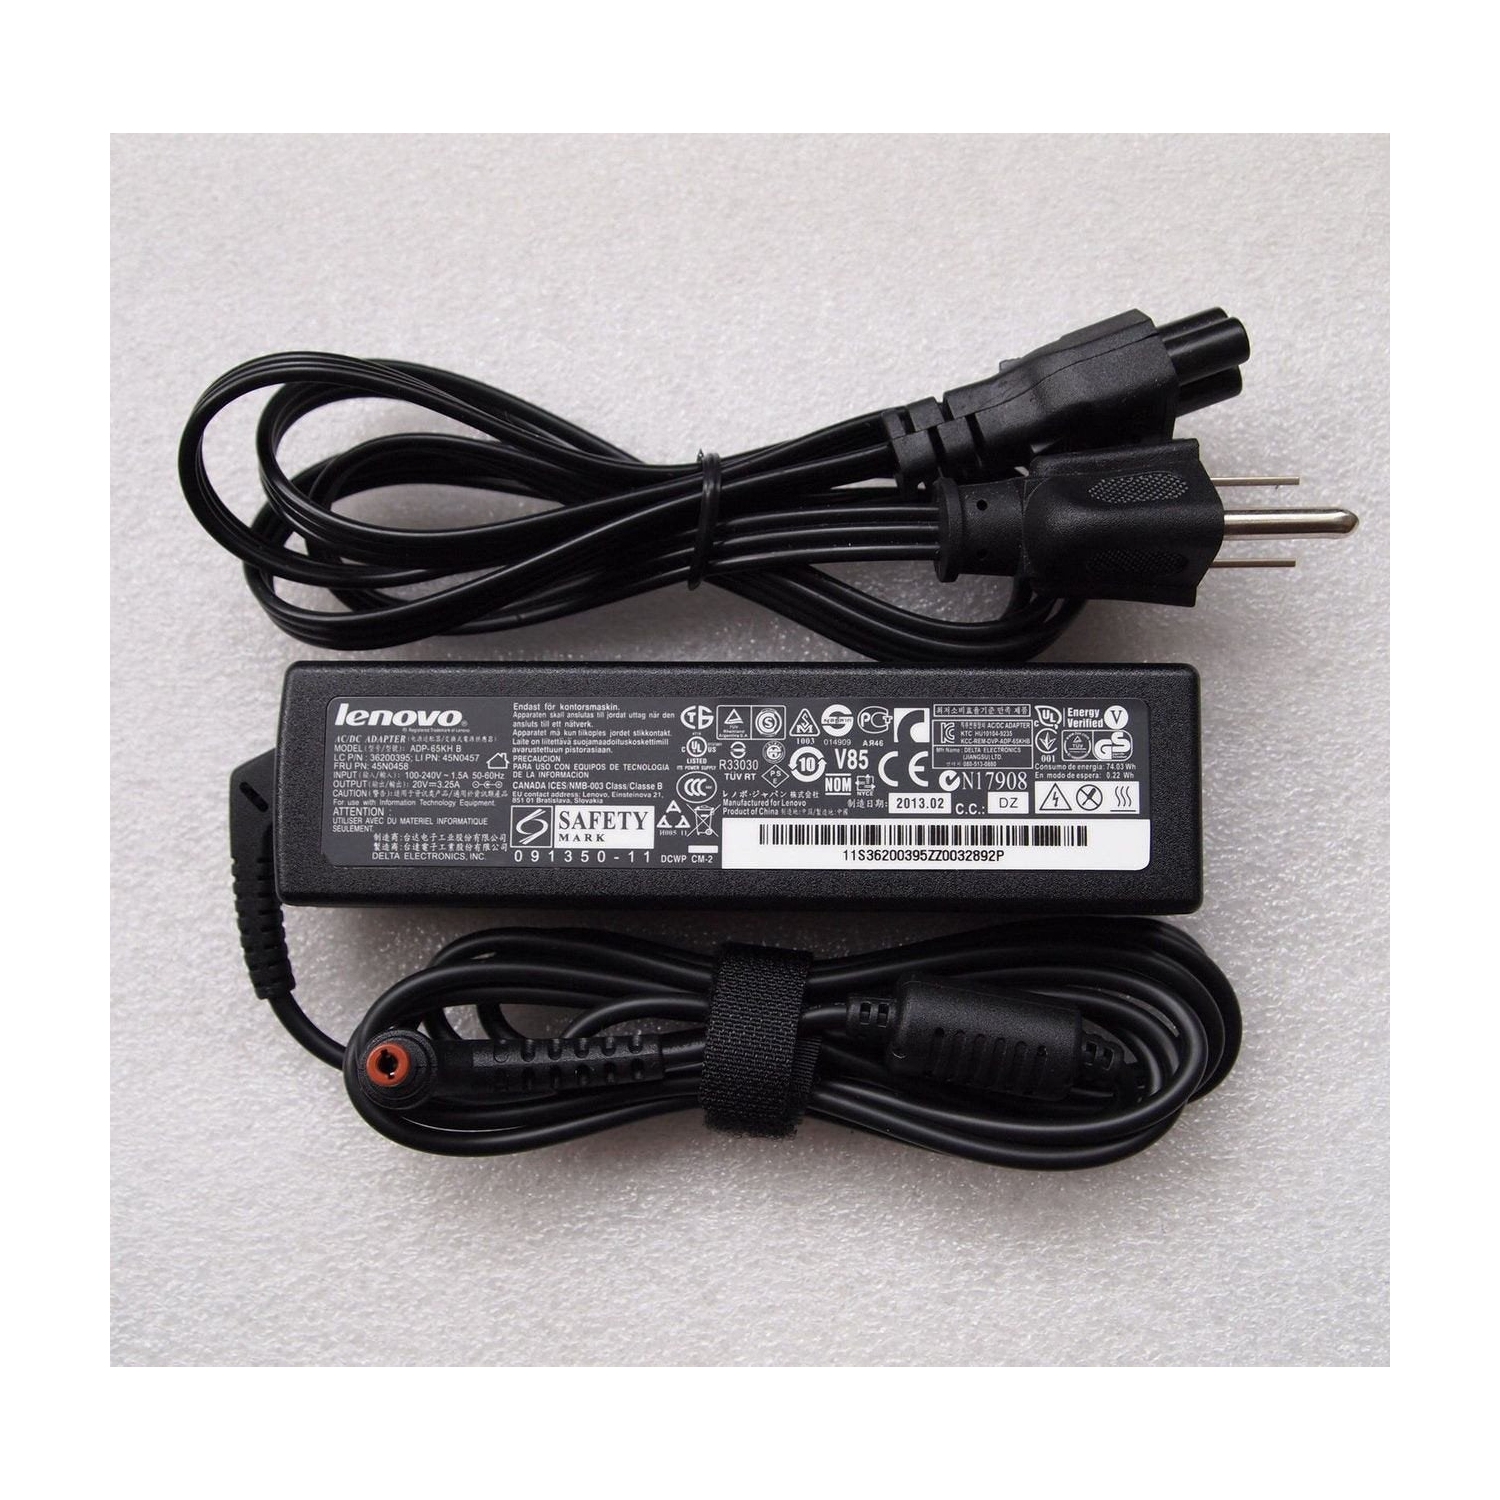 New Genuine Lenovo IdeaPad S100 S205 S205s S206 S300 S400 S405 S410 S415 80BX S435 AC Power Adapter Charger 65W